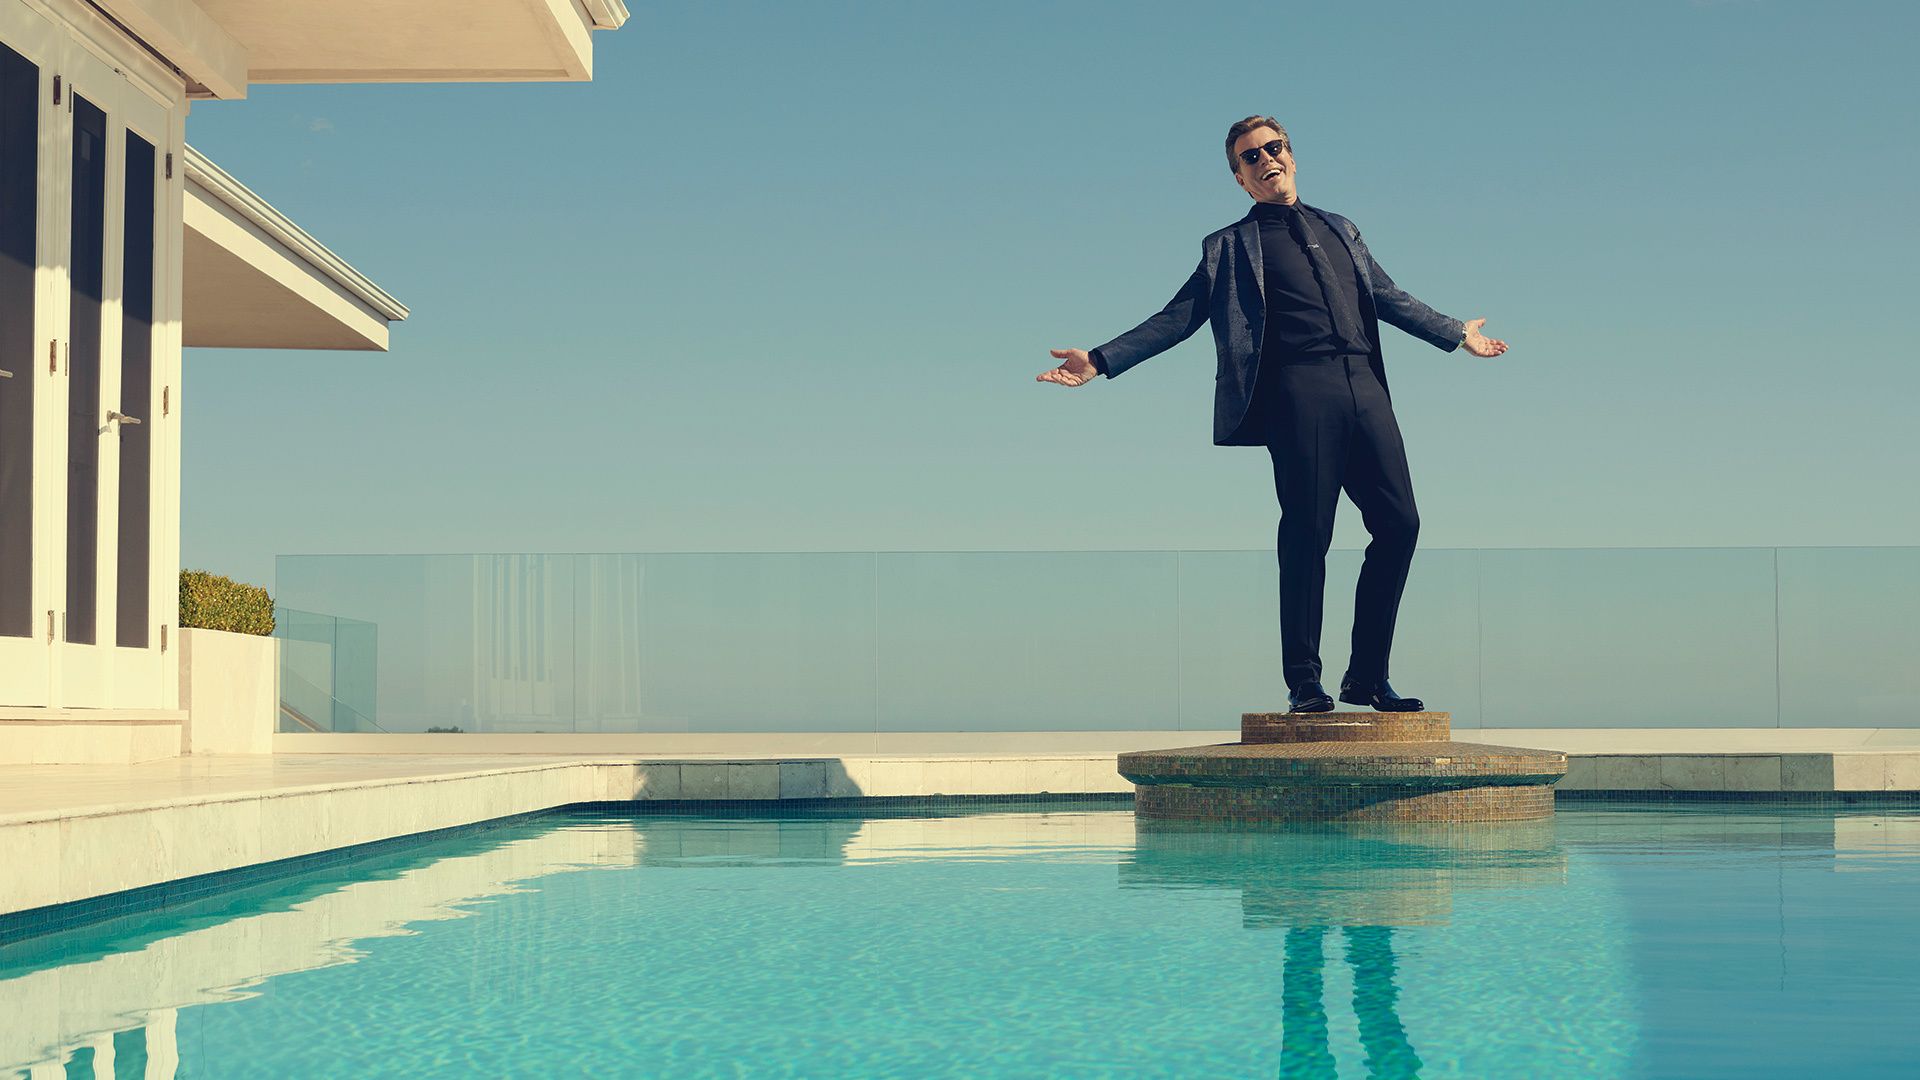 Peter Bergman standing in a suit with his arms outstretched on a platform on an in-ground pool